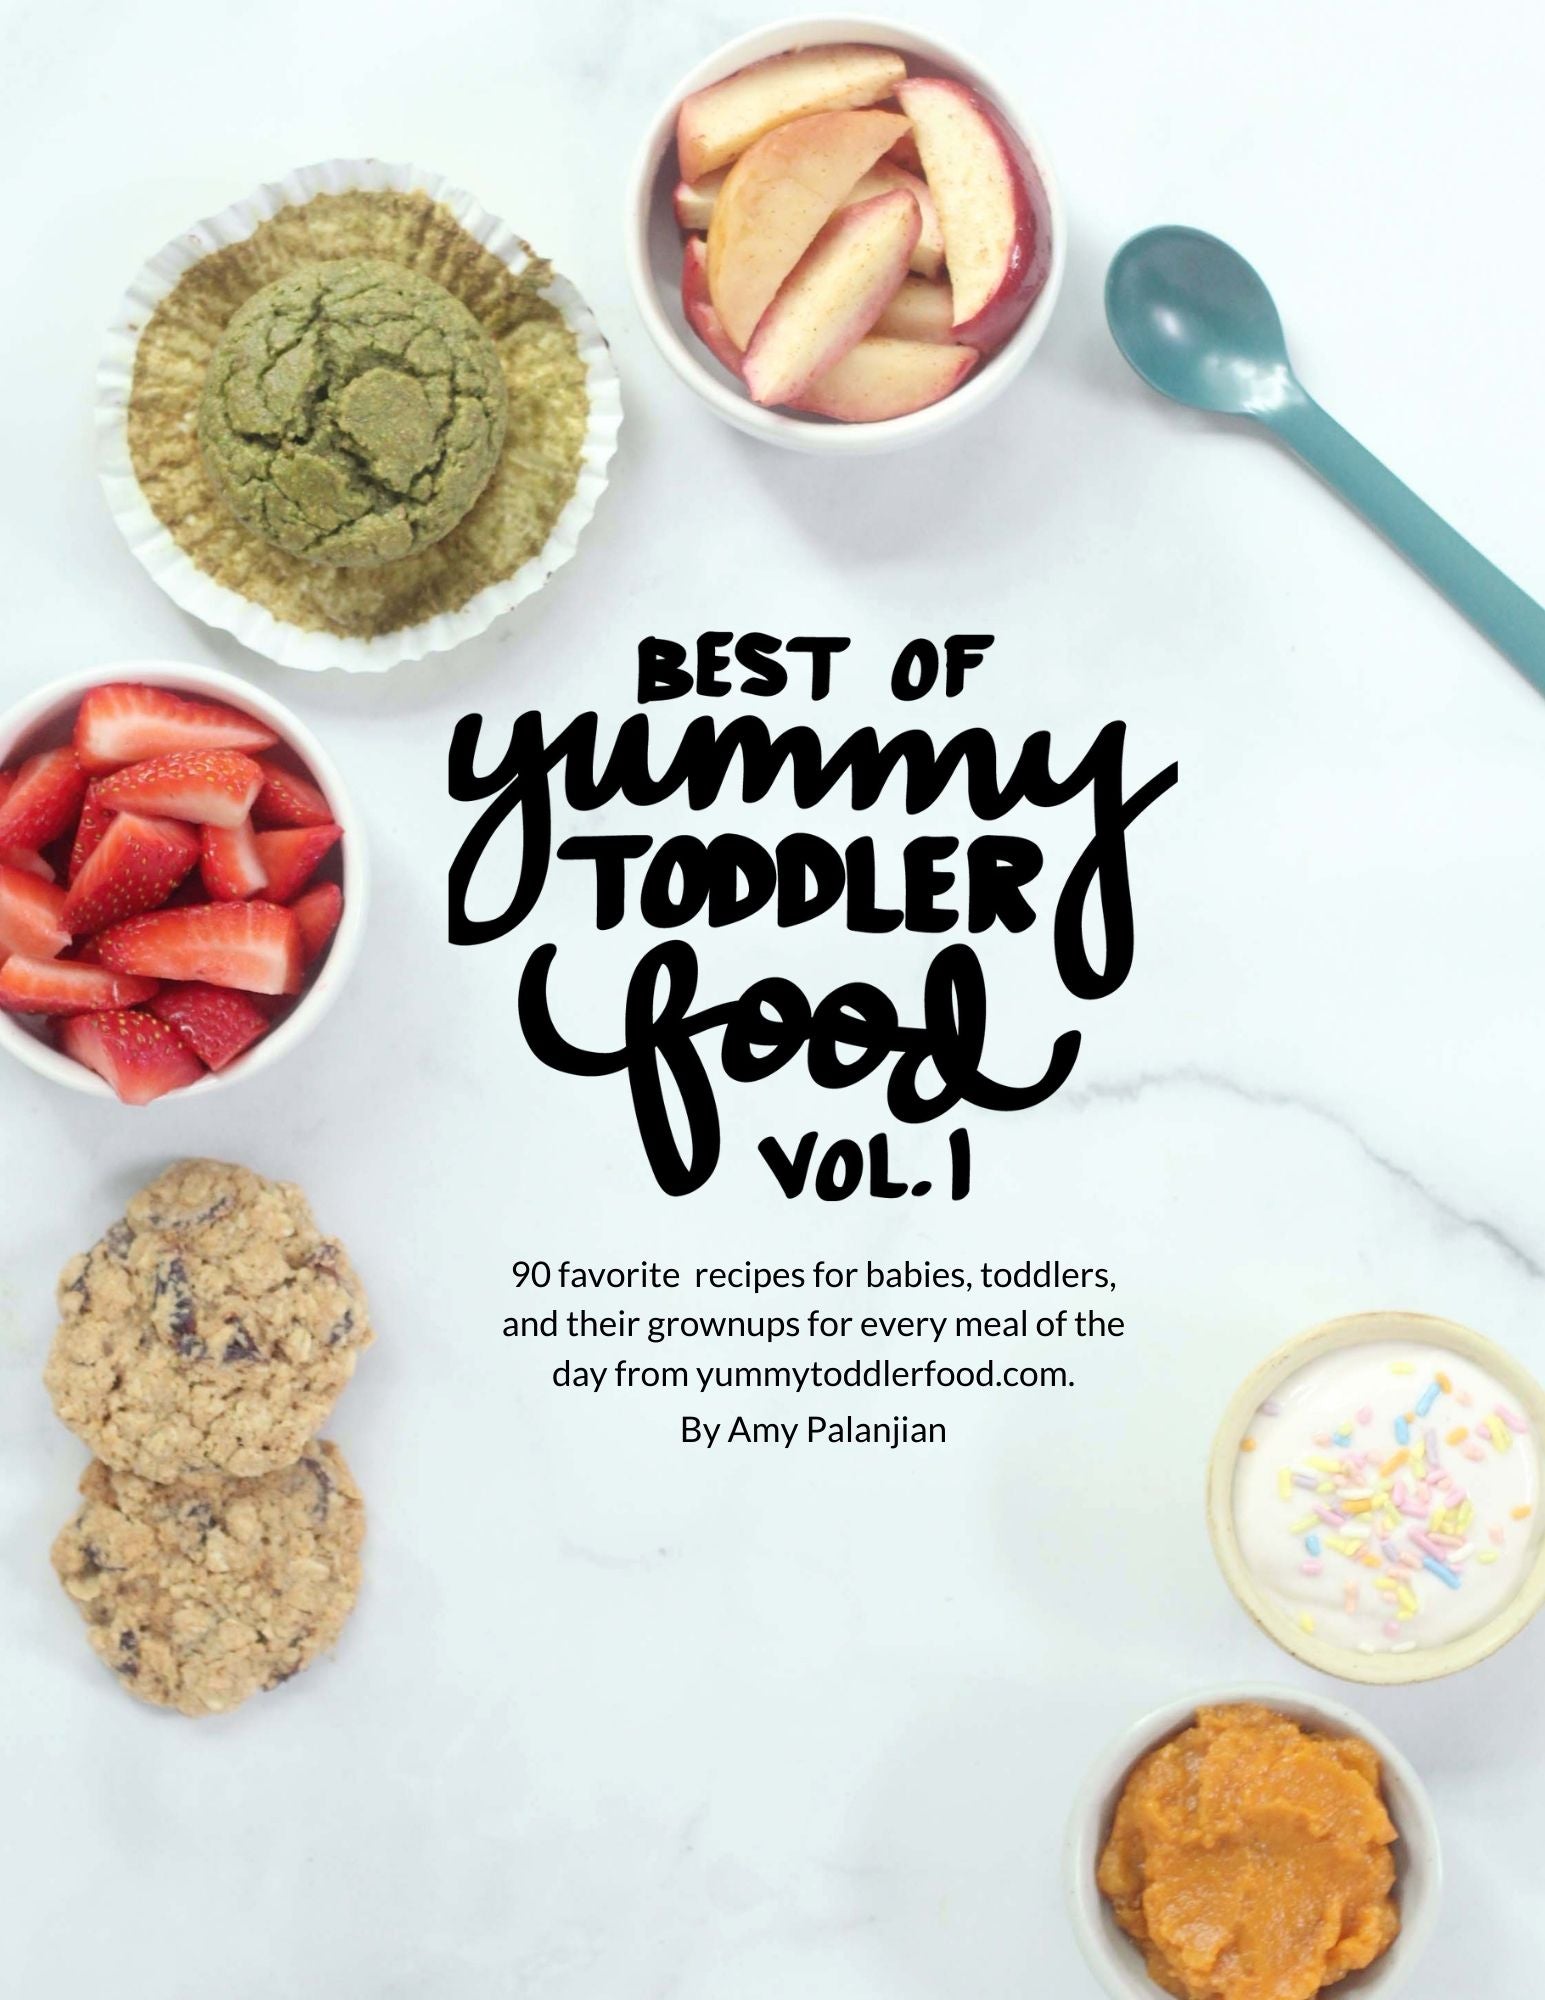 Best of Yummy Toddler Food